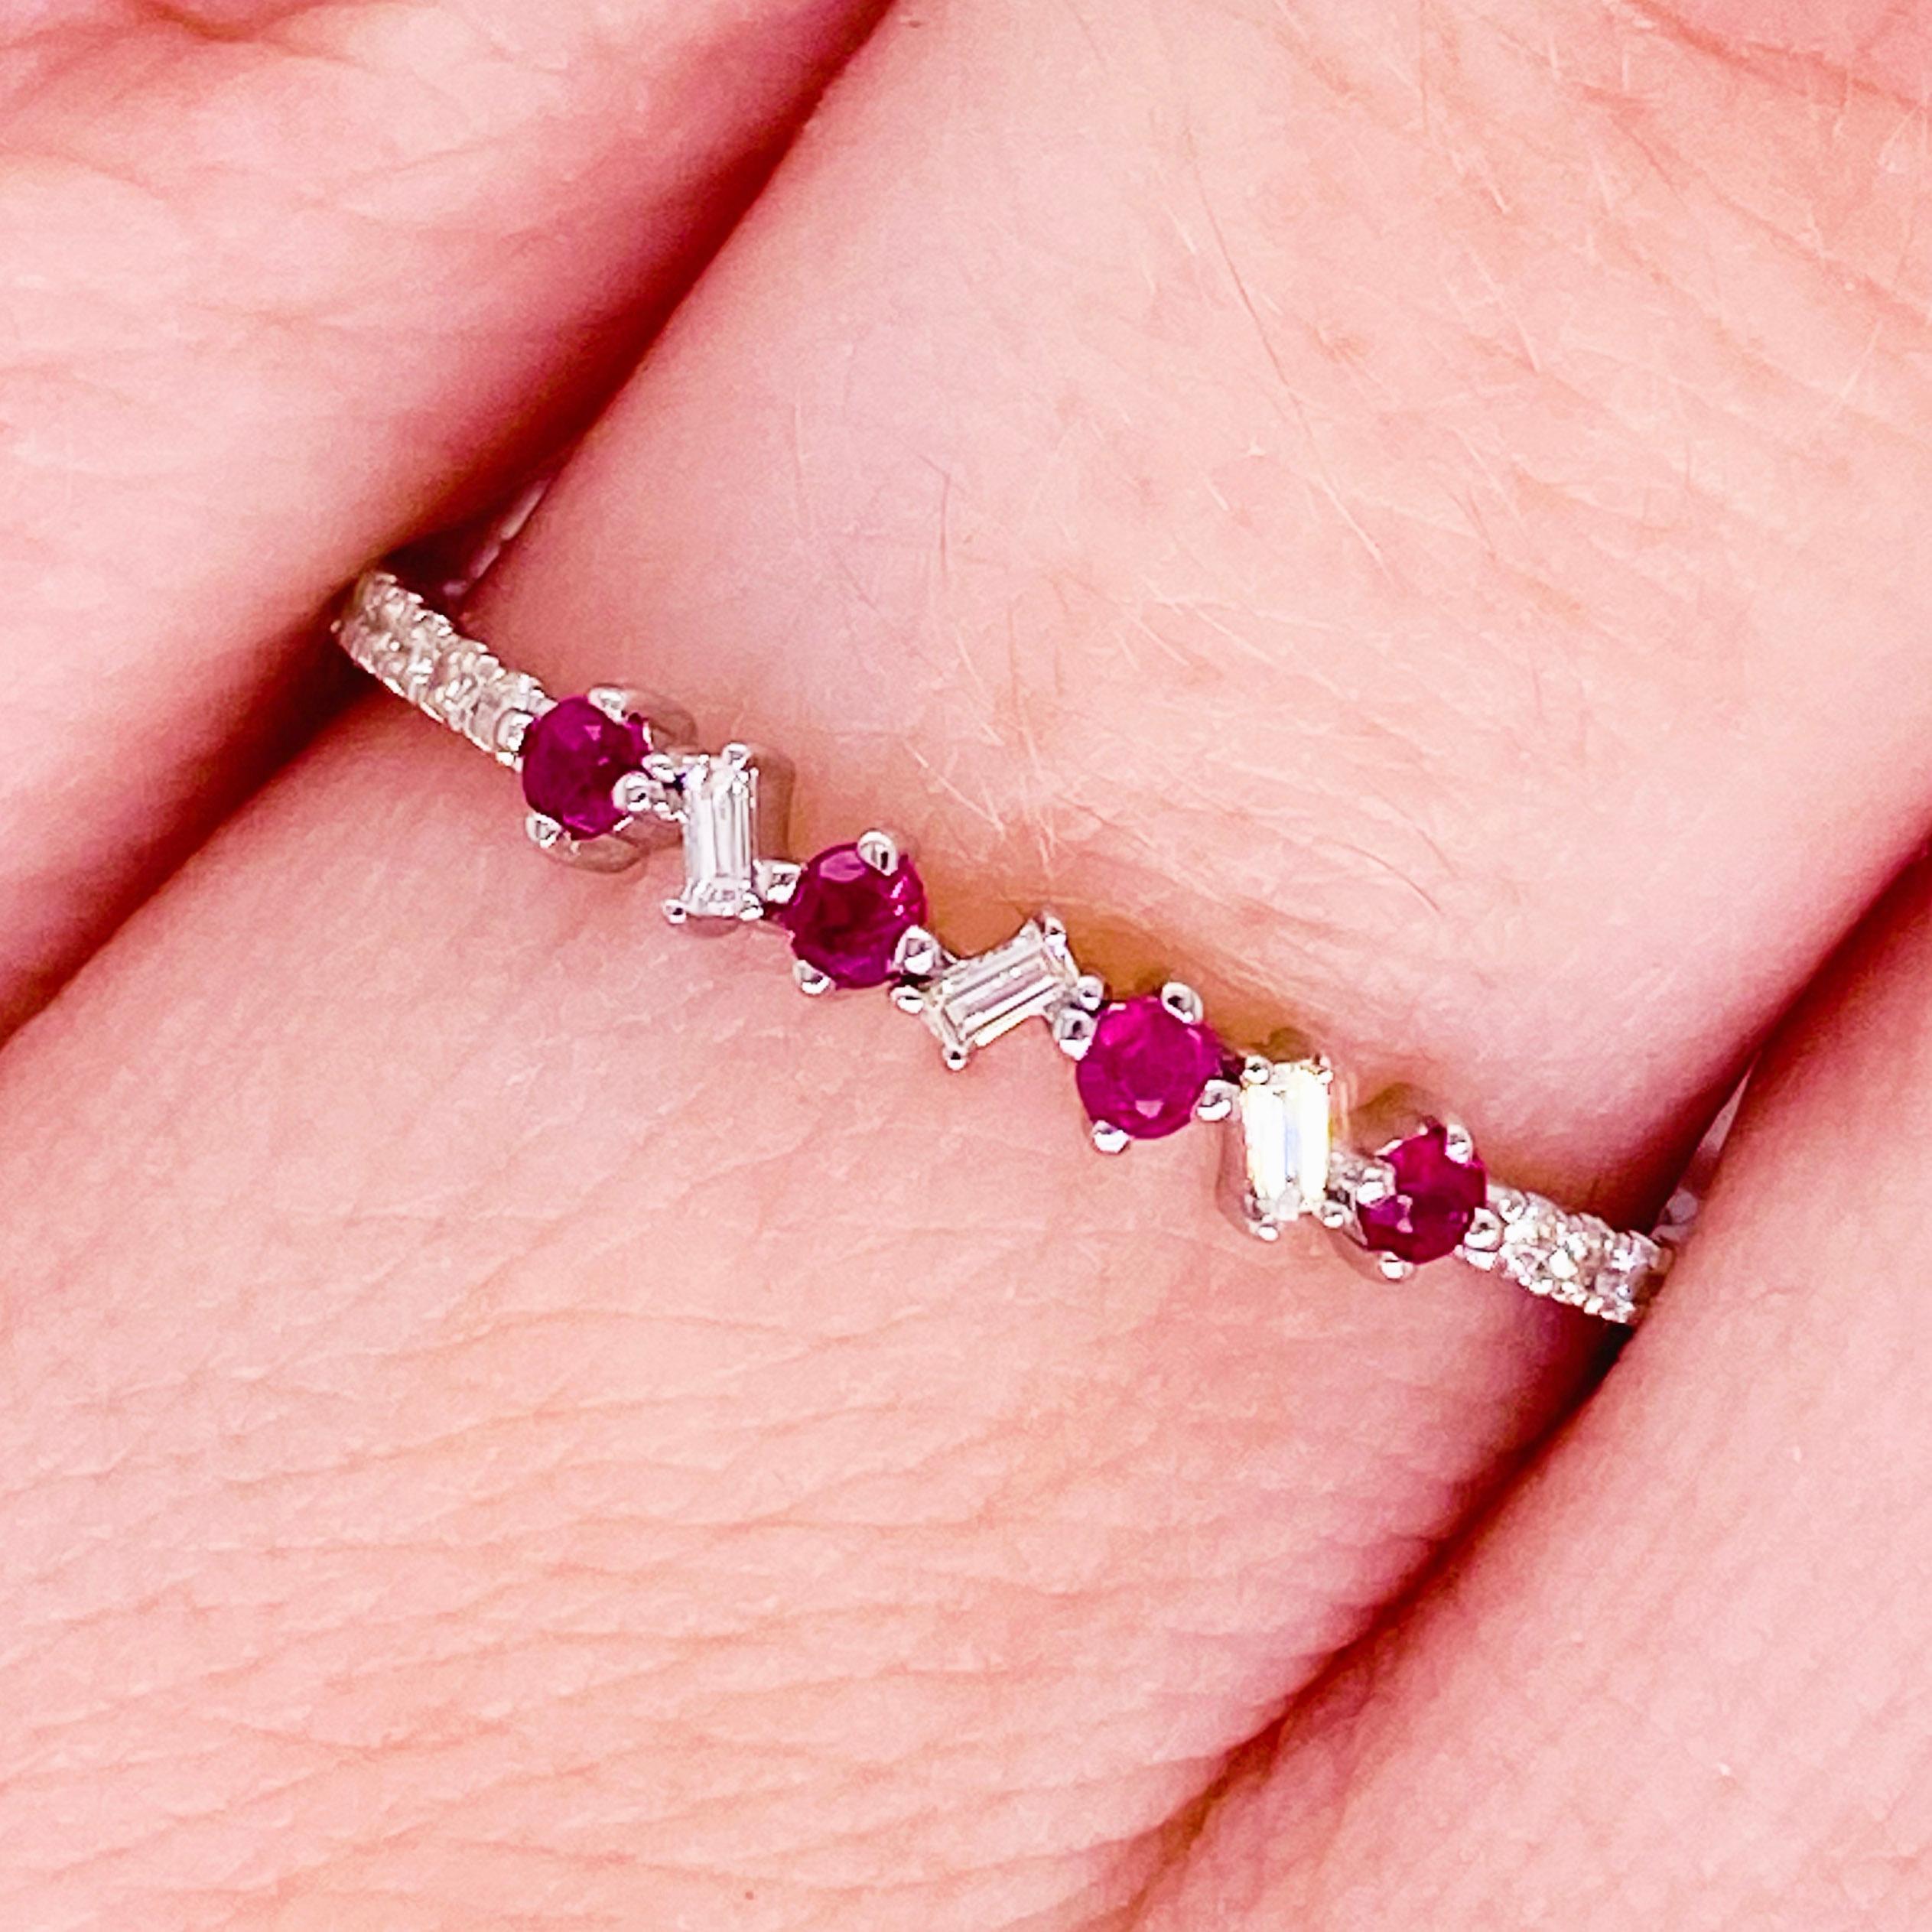 Vibrant rubies and bright white diamonds have never looked better! This ruby and diamond band has genuine, natural round ruby gemstones set next to bright baguette and round white diamonds. The stones are set in a 14 karat white gold band! It looks